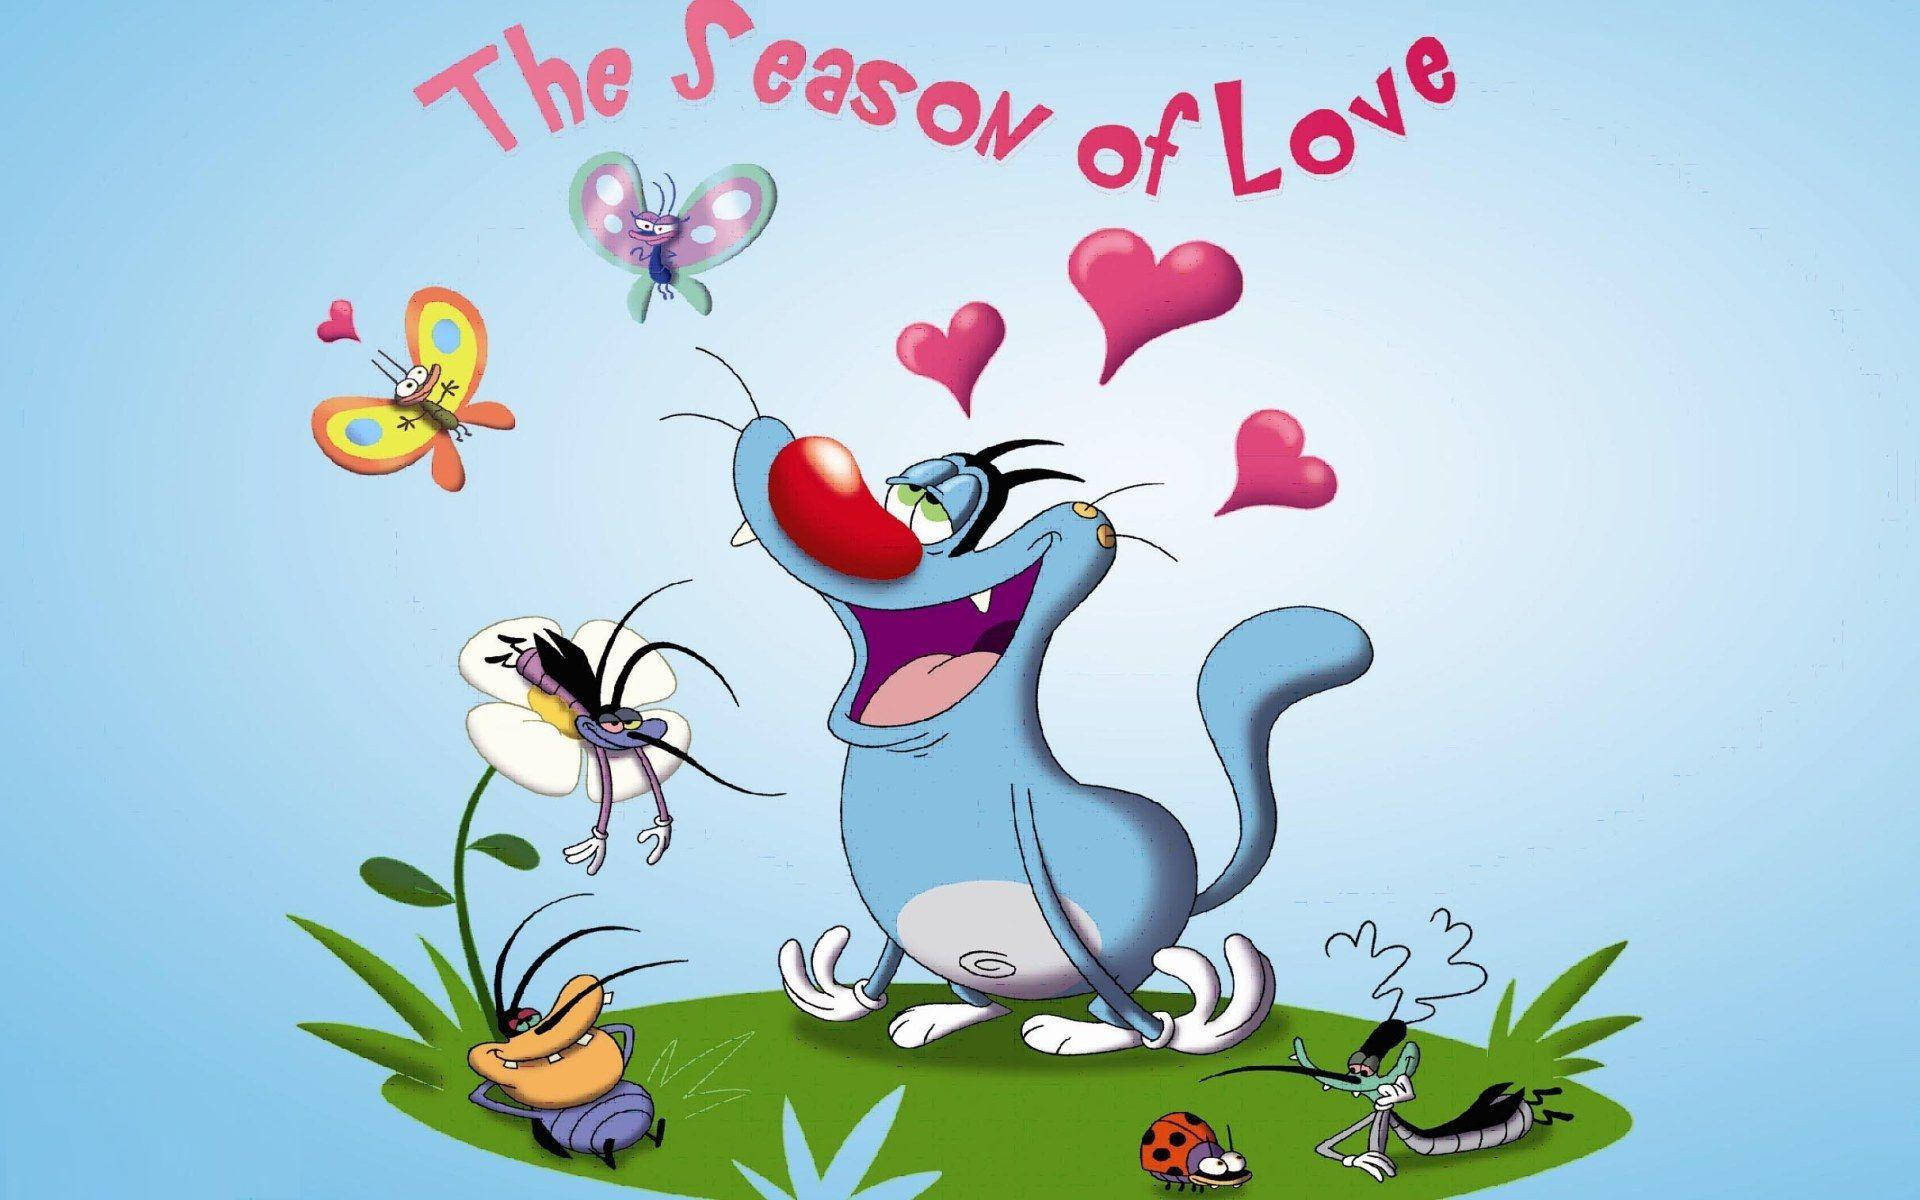 Oggy And The Cockroaches Season Of Love